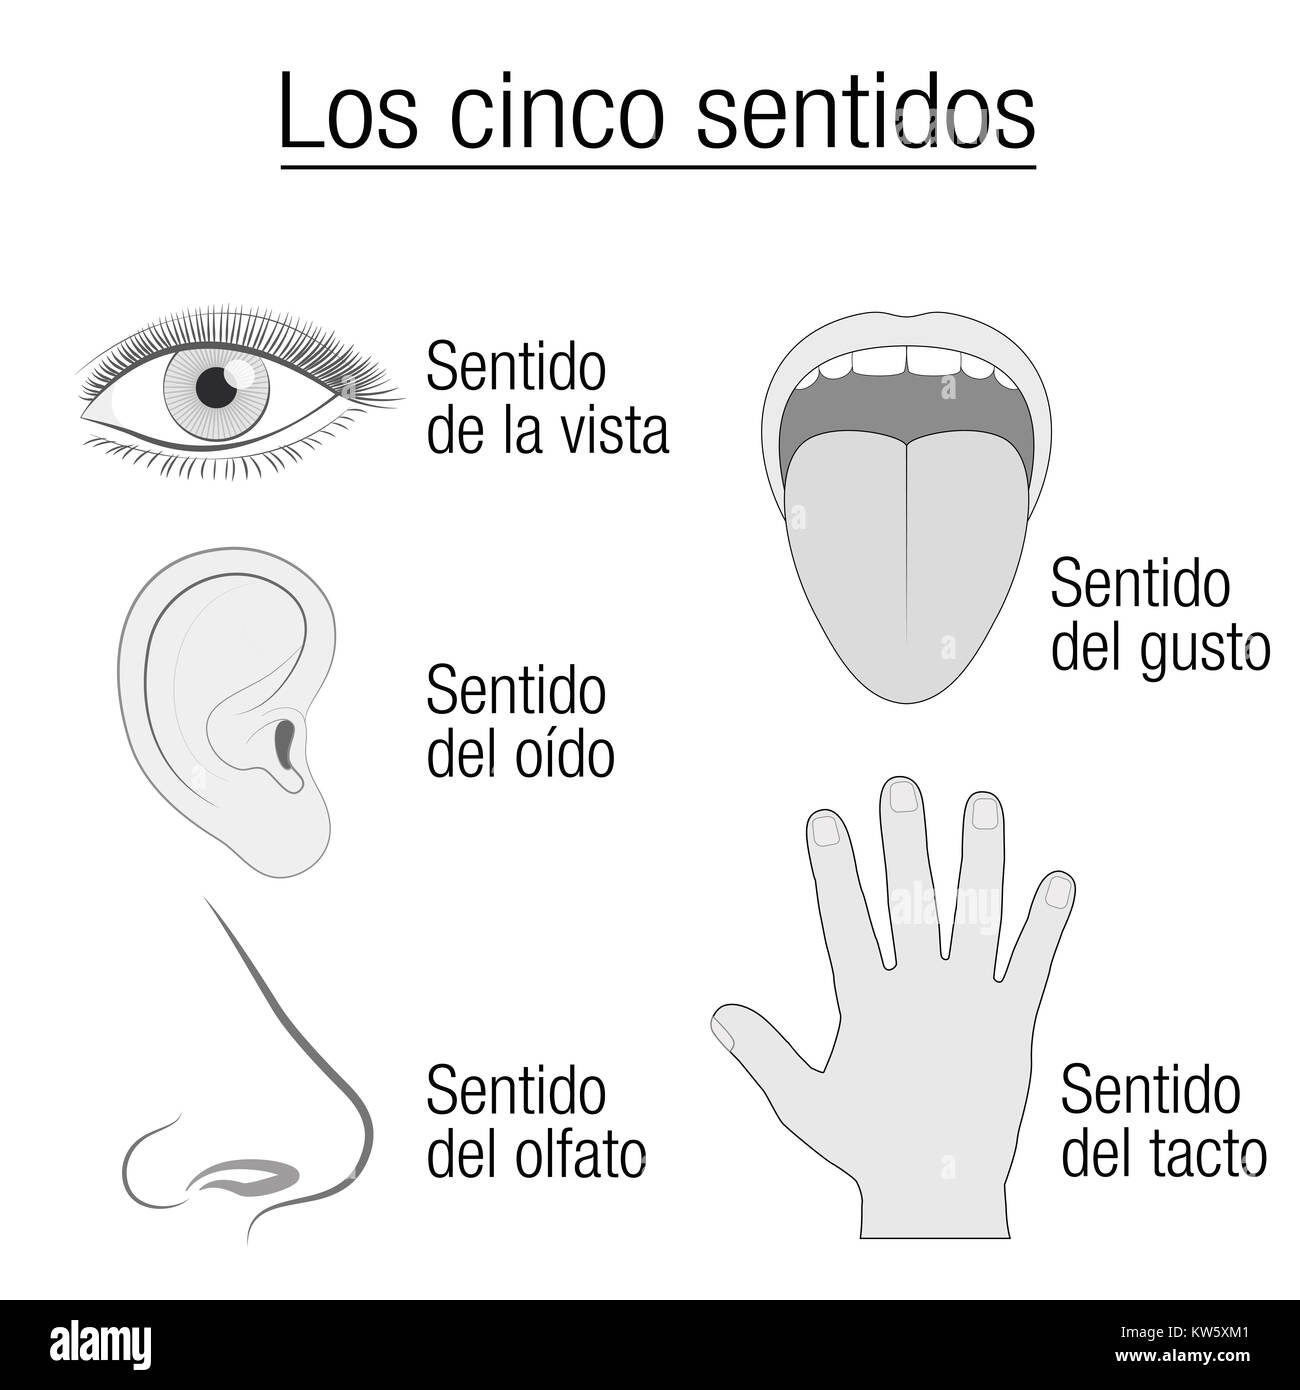 Five senses chart with sensory organs eye, ear, tongue, nose, hand - appropriate designation sight, hearing, taste, smell touch - SPANISH LANGUAGE. Stock Photo